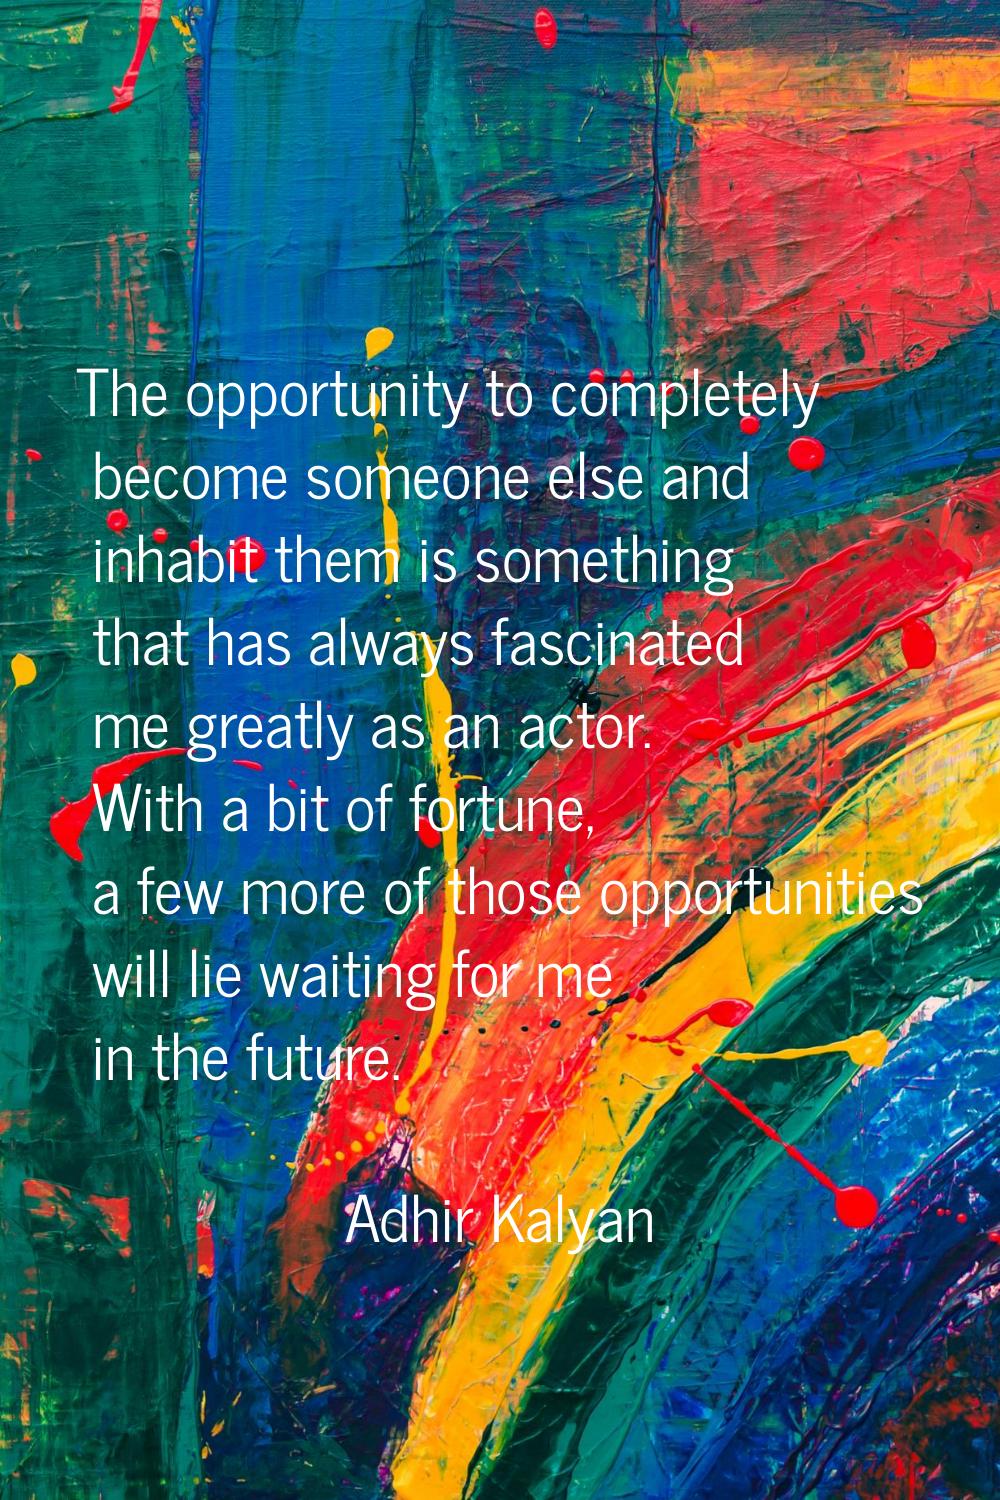 The opportunity to completely become someone else and inhabit them is something that has always fas